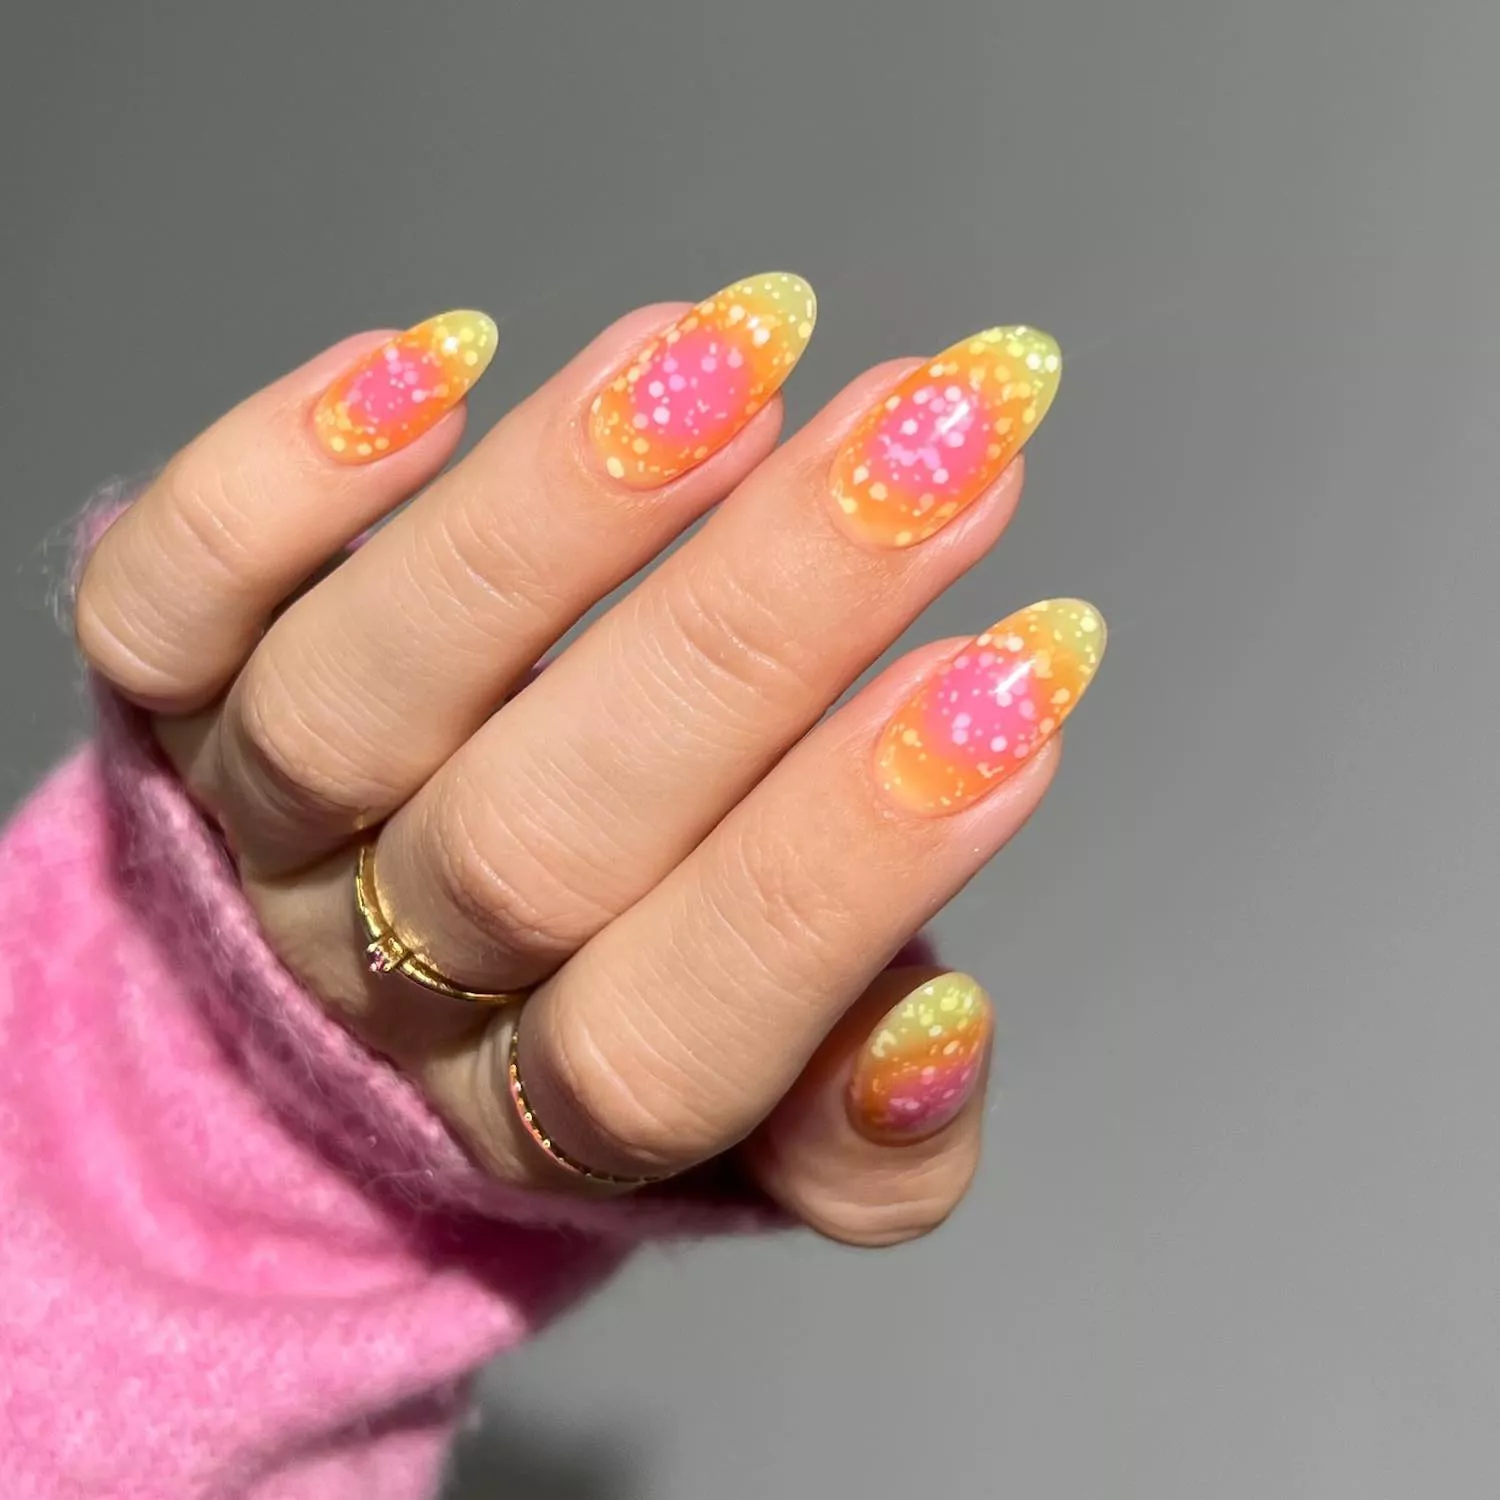 Manicure with pink and yellow aura design and confetti texture